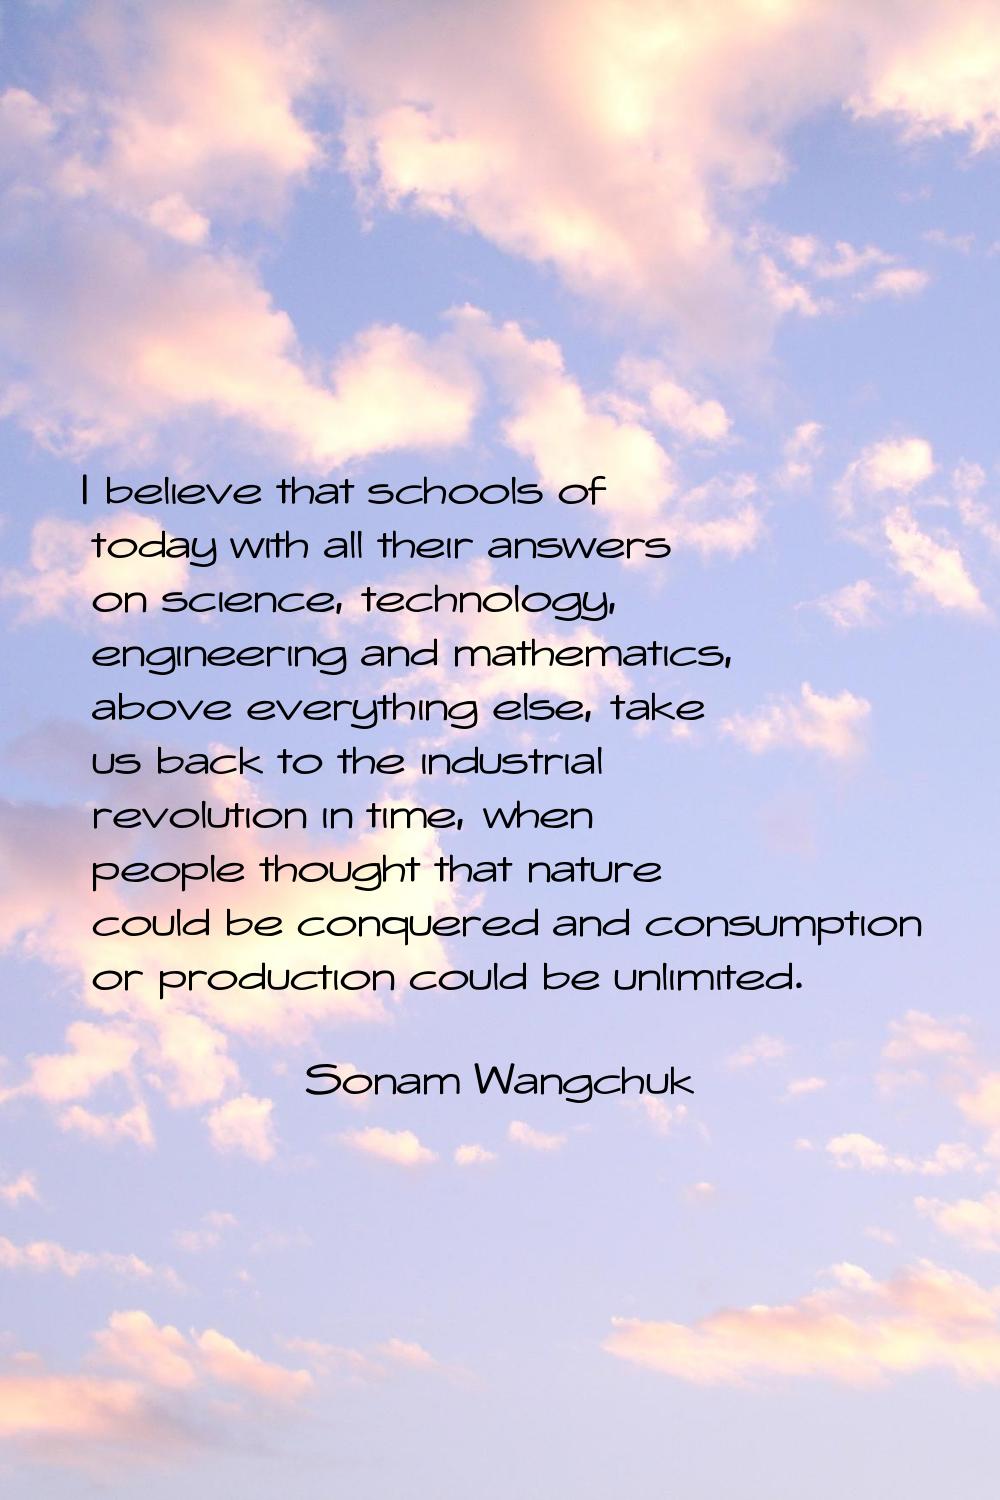 I believe that schools of today with all their answers on science, technology, engineering and math